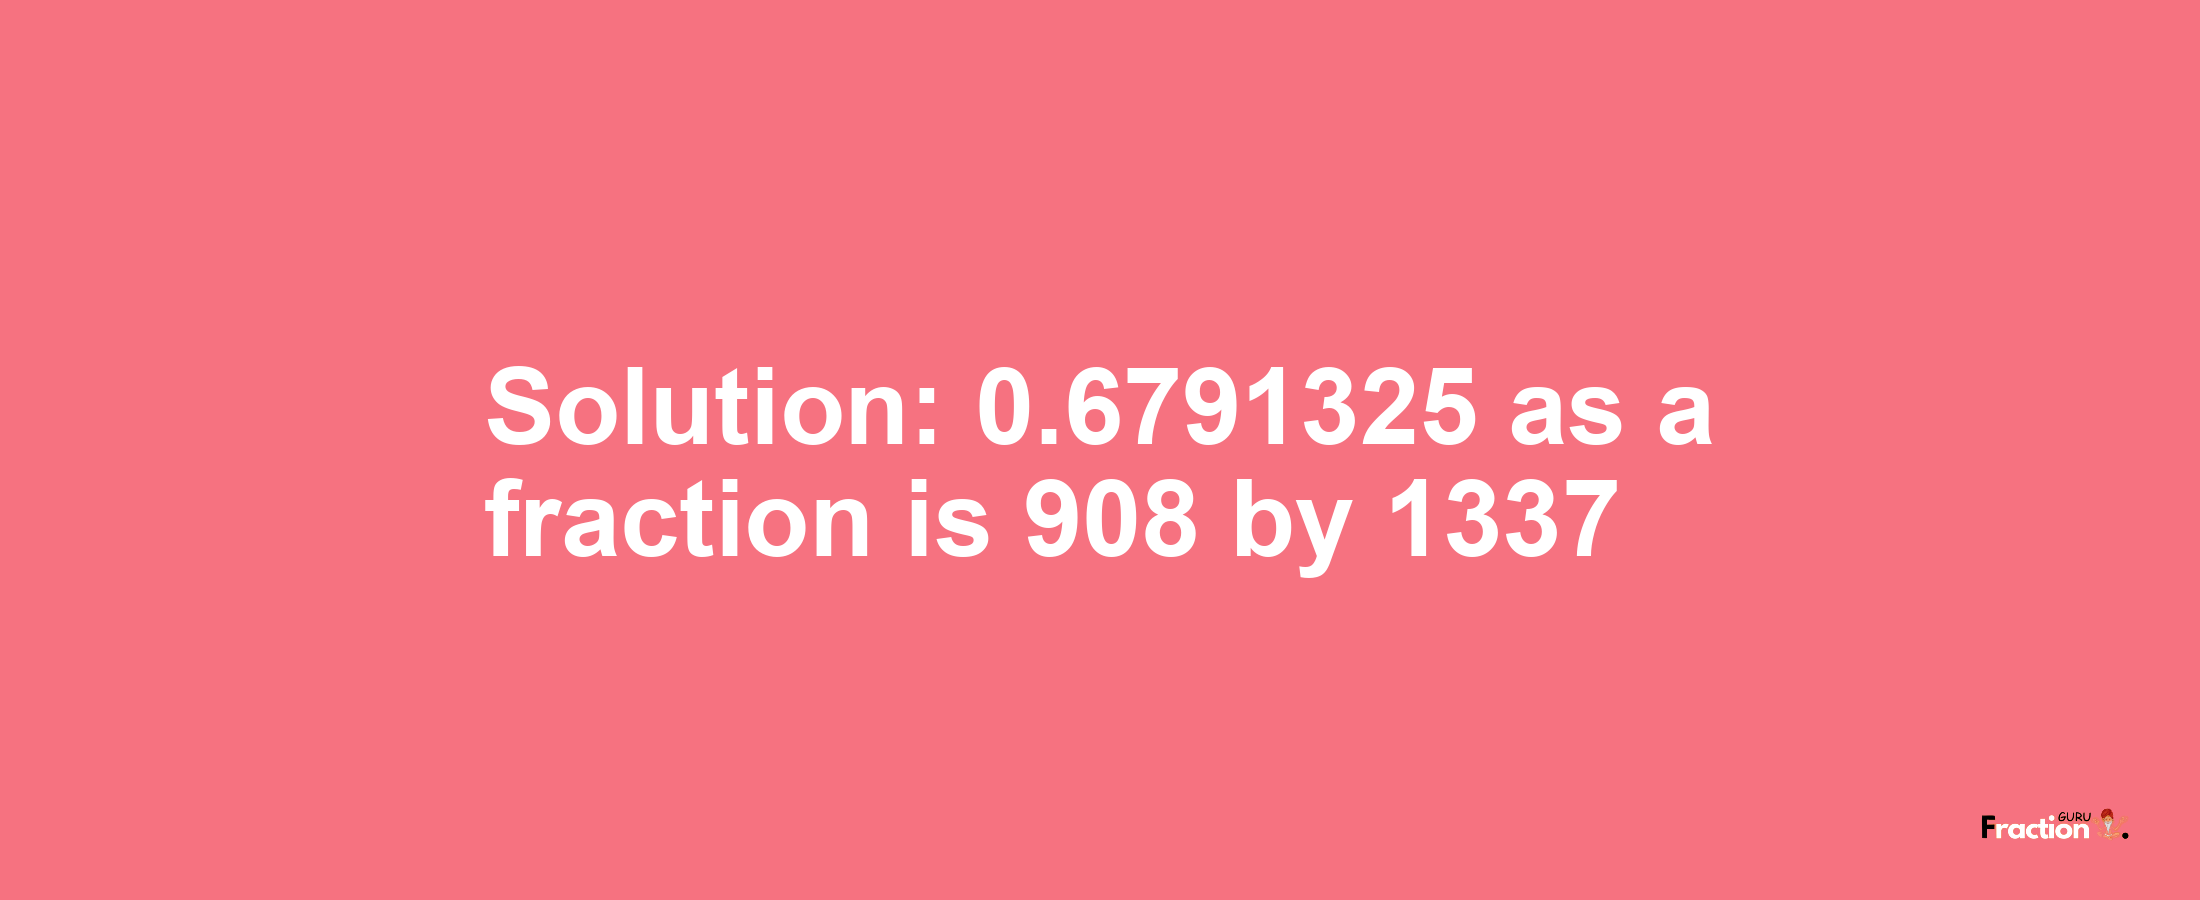 Solution:0.6791325 as a fraction is 908/1337